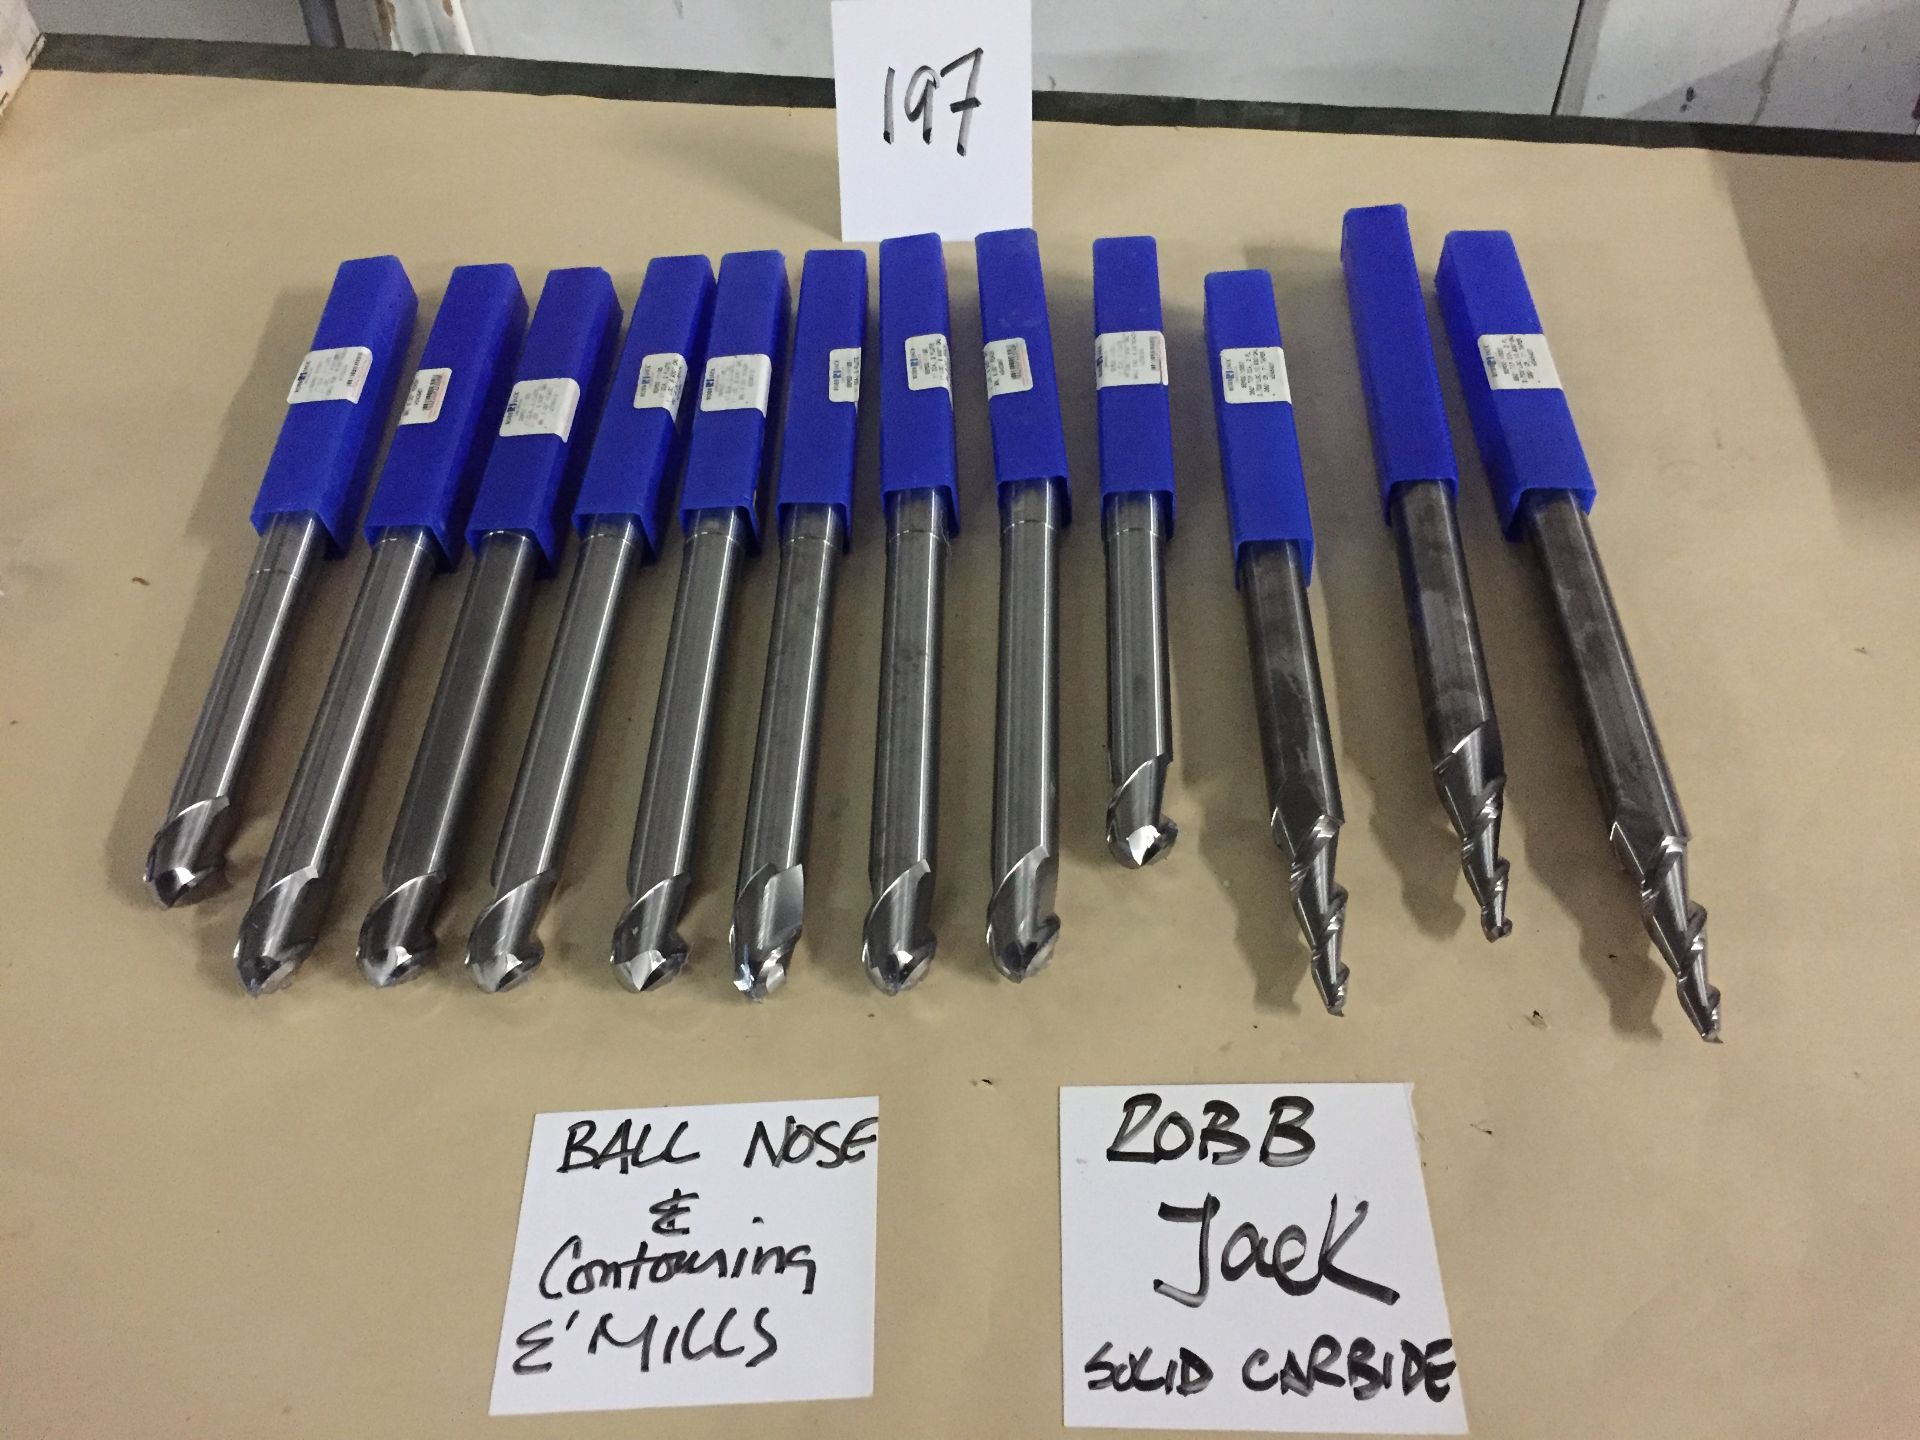 Assortment of Robb Jack Carbide Mills, Ball Nose & Contouring End Mills